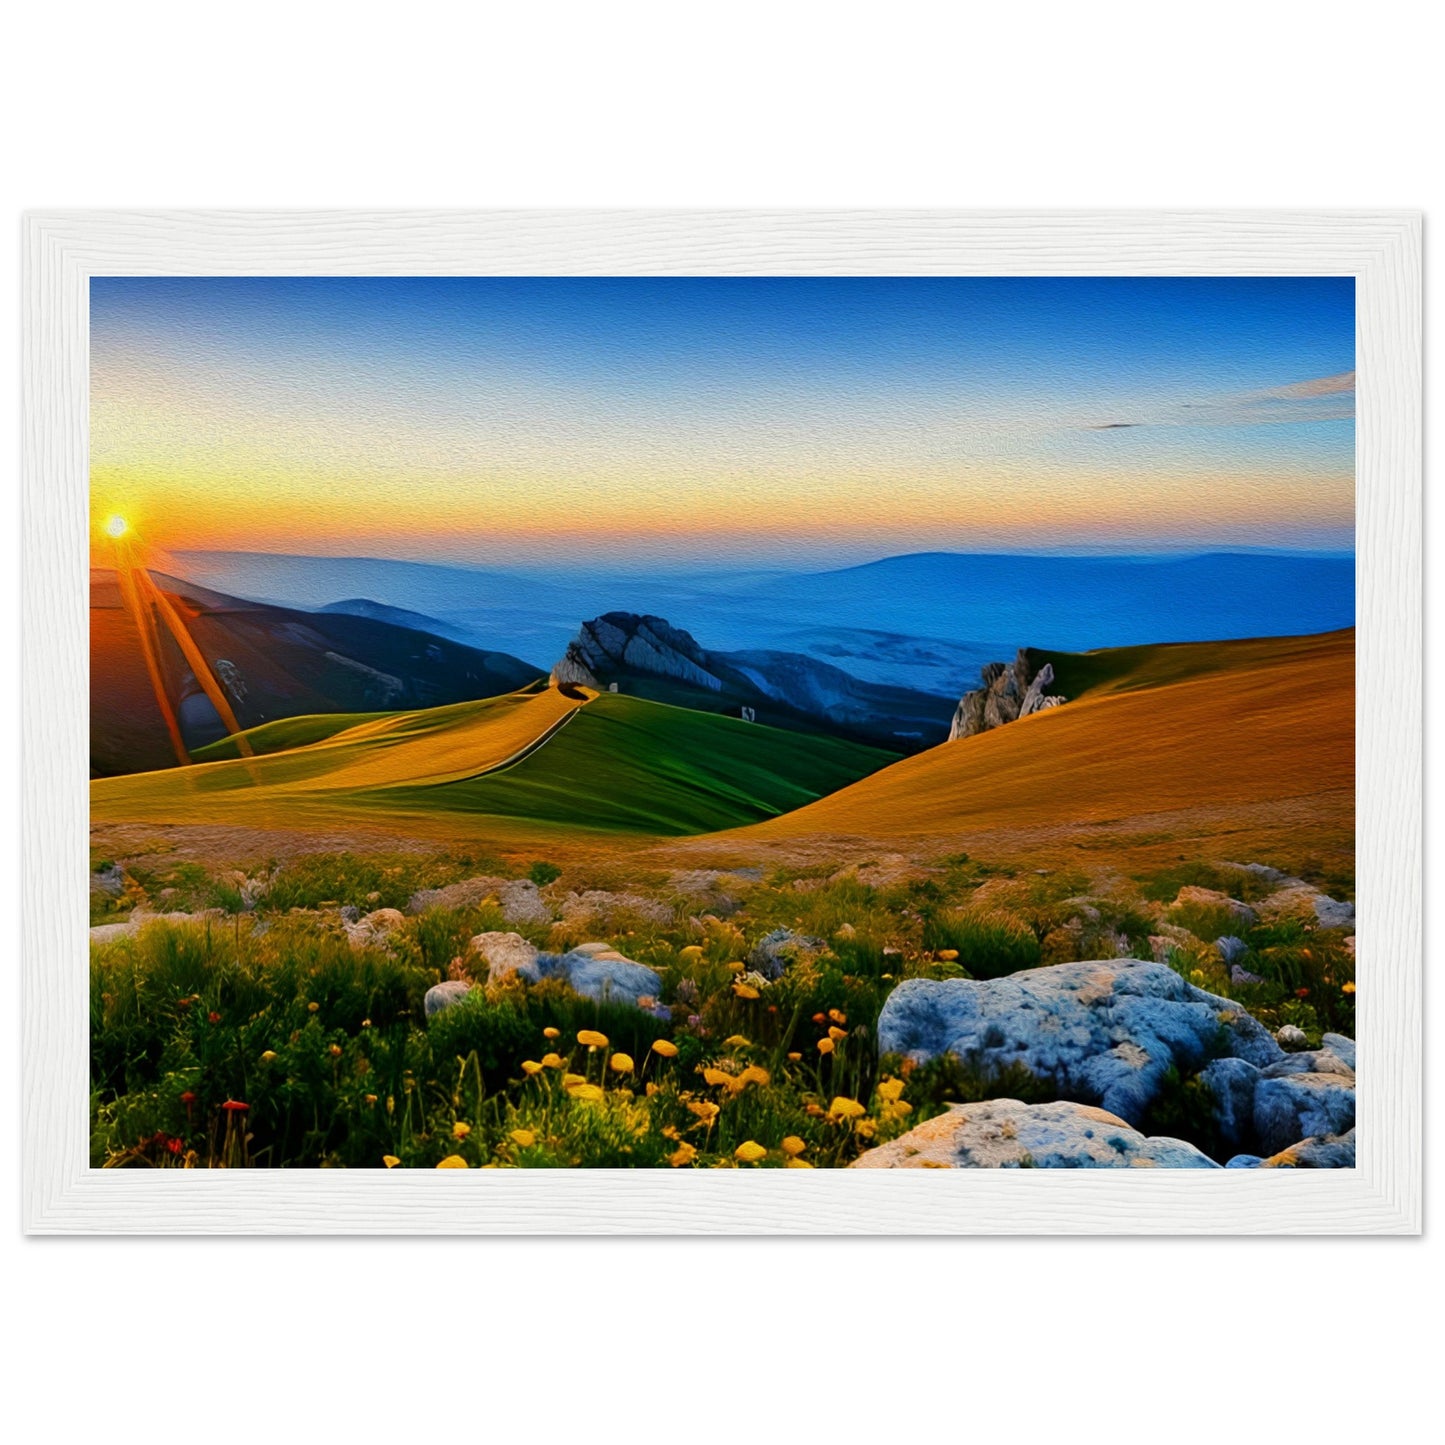 Mountain landscape with sunset